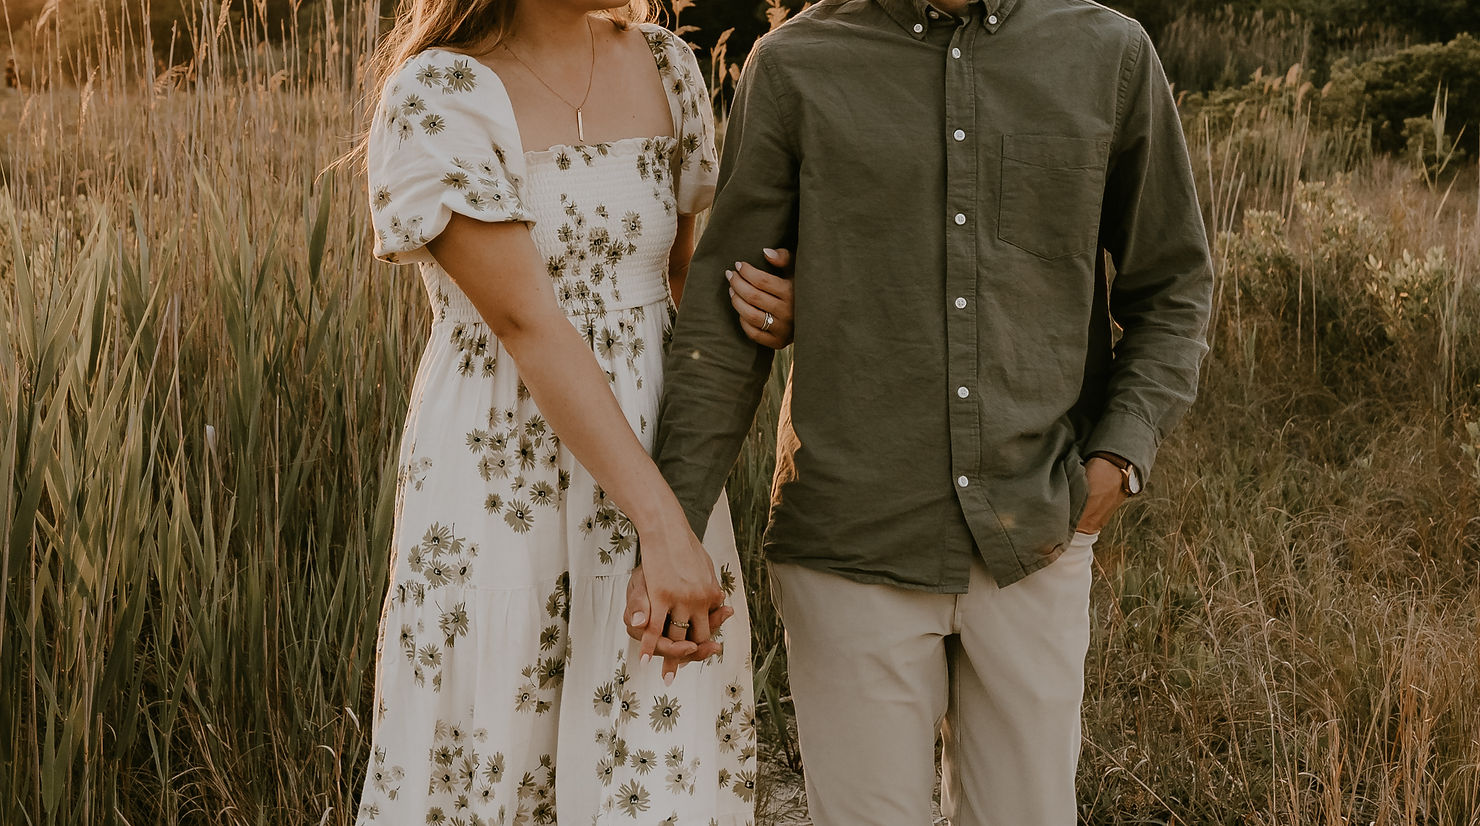 Best Places To Take Engagement Photos In Virginia